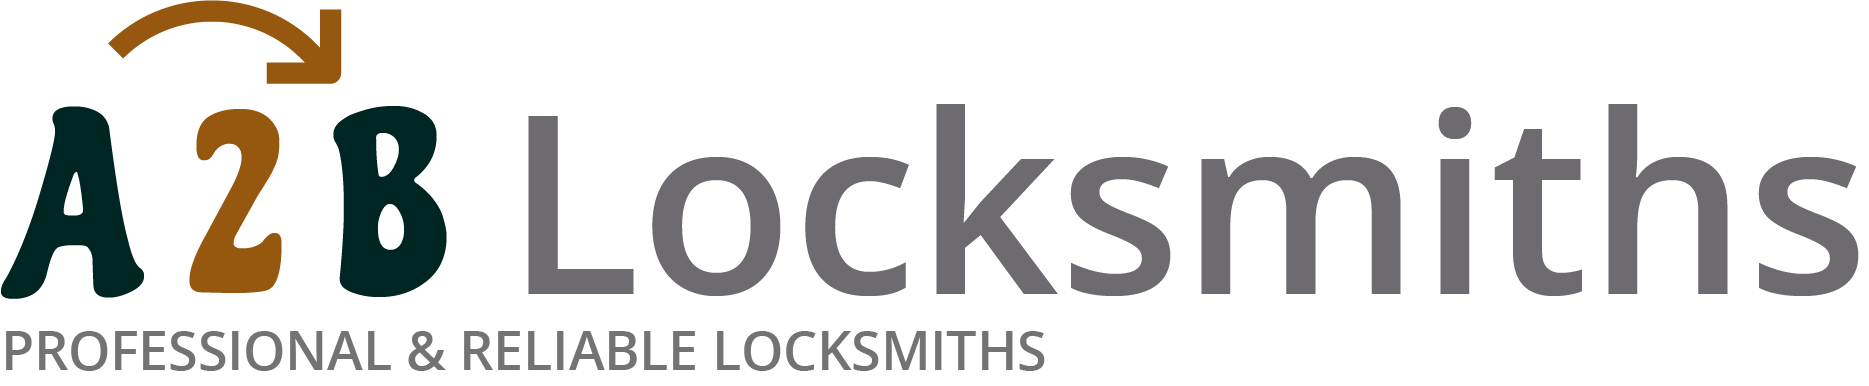 If you are locked out of house in Portishead, our 24/7 local emergency locksmith services can help you.